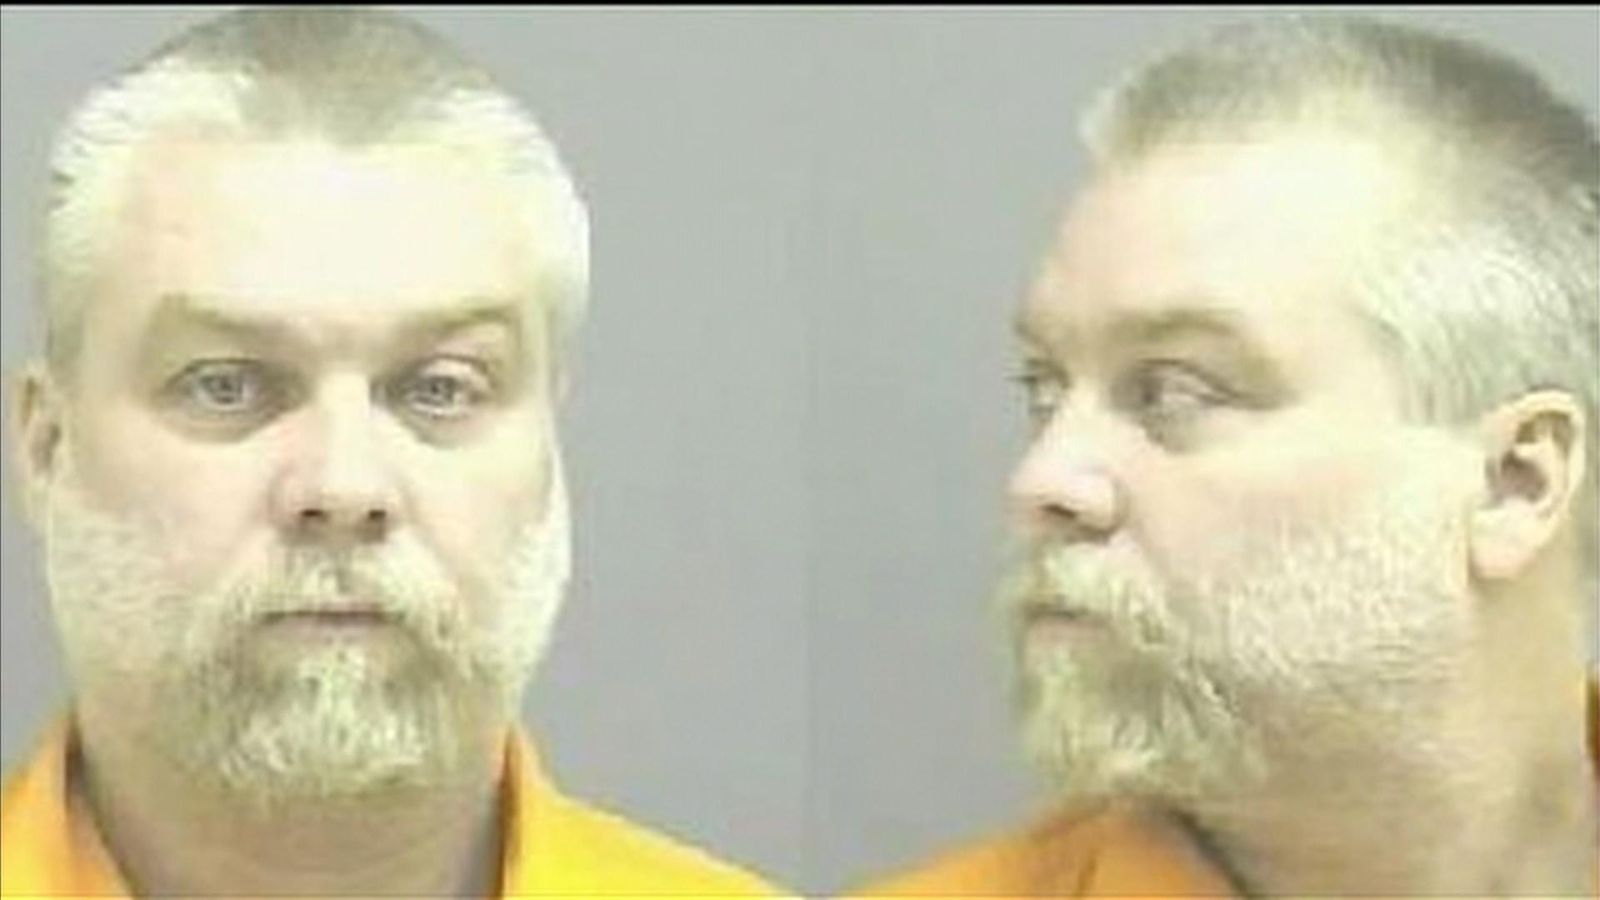 Making a Murderer's Steven Avery is granted an appeal against murder conviction